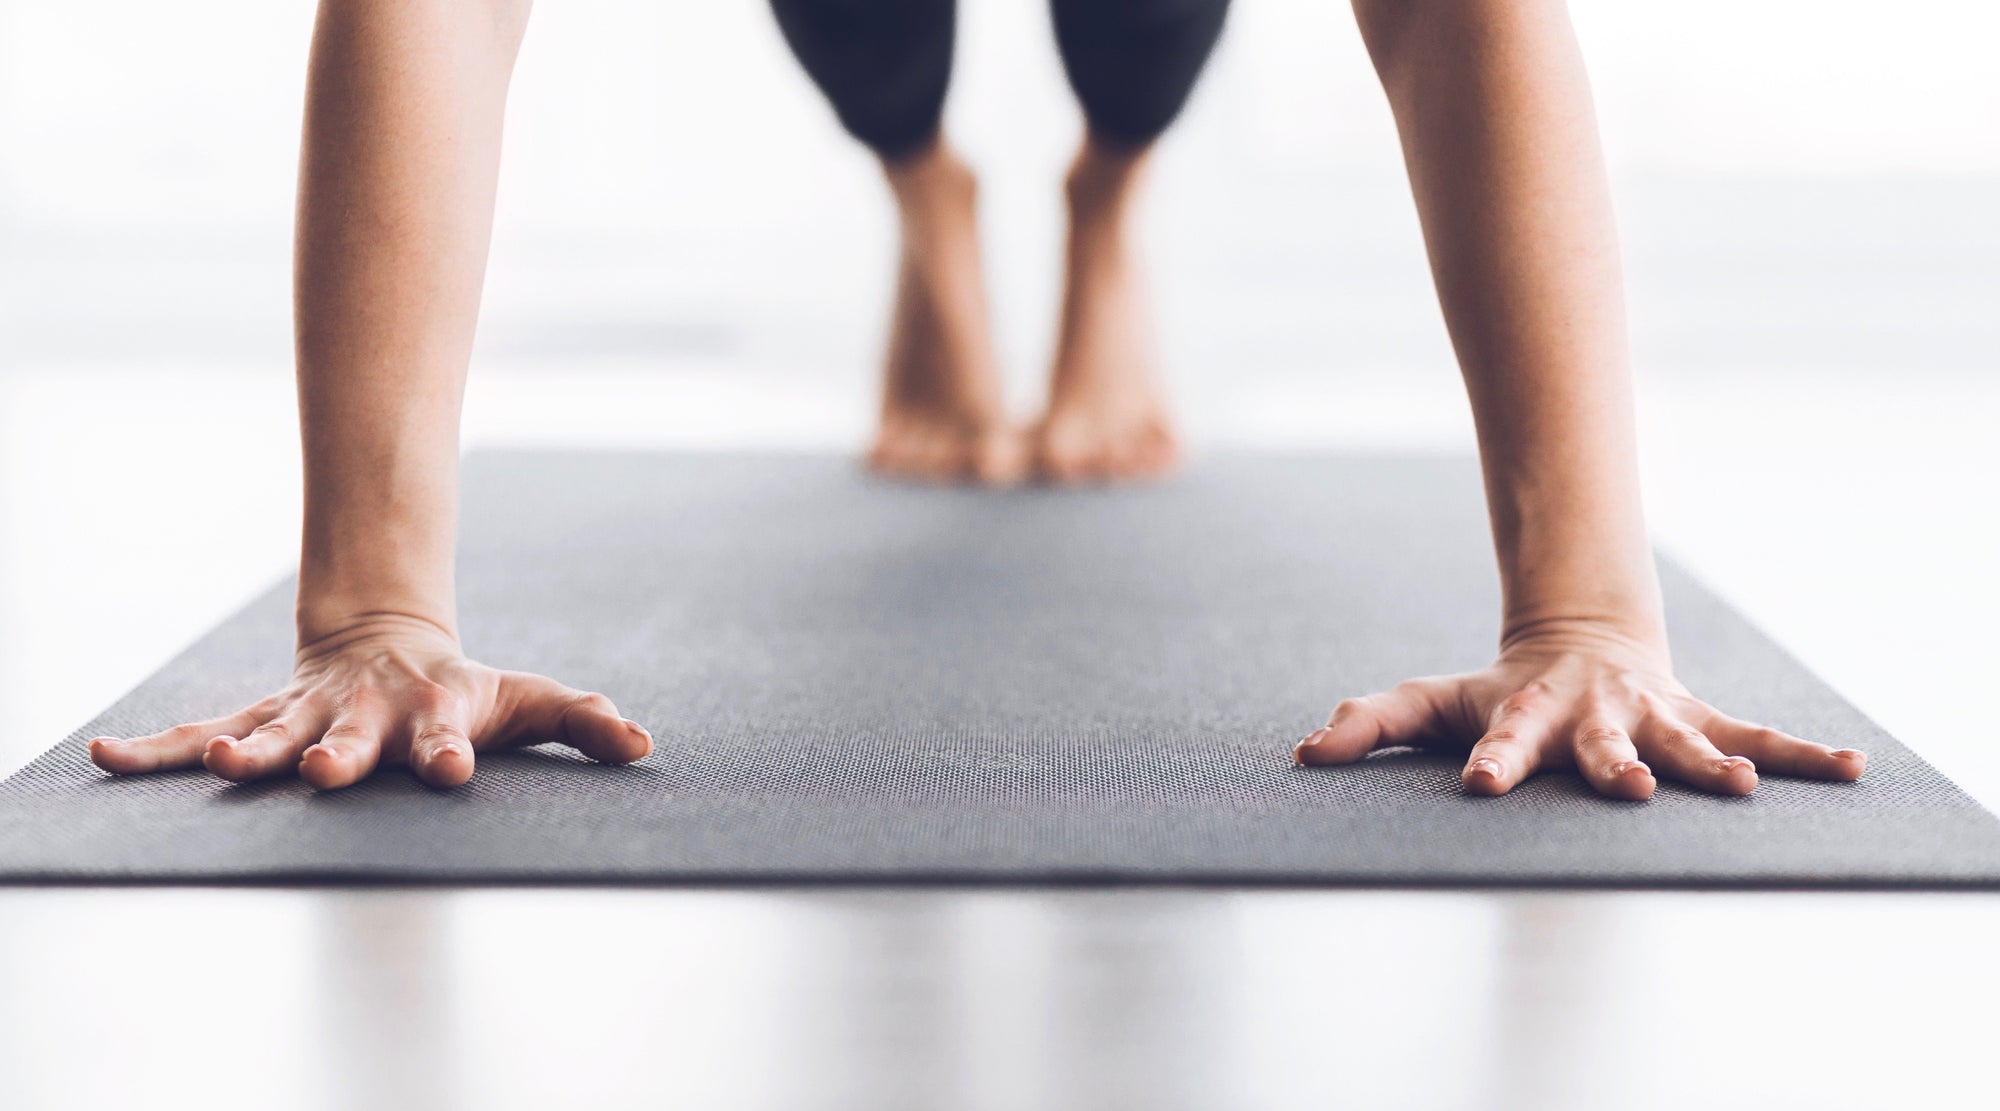 How to bring mindfulness to any yoga practice